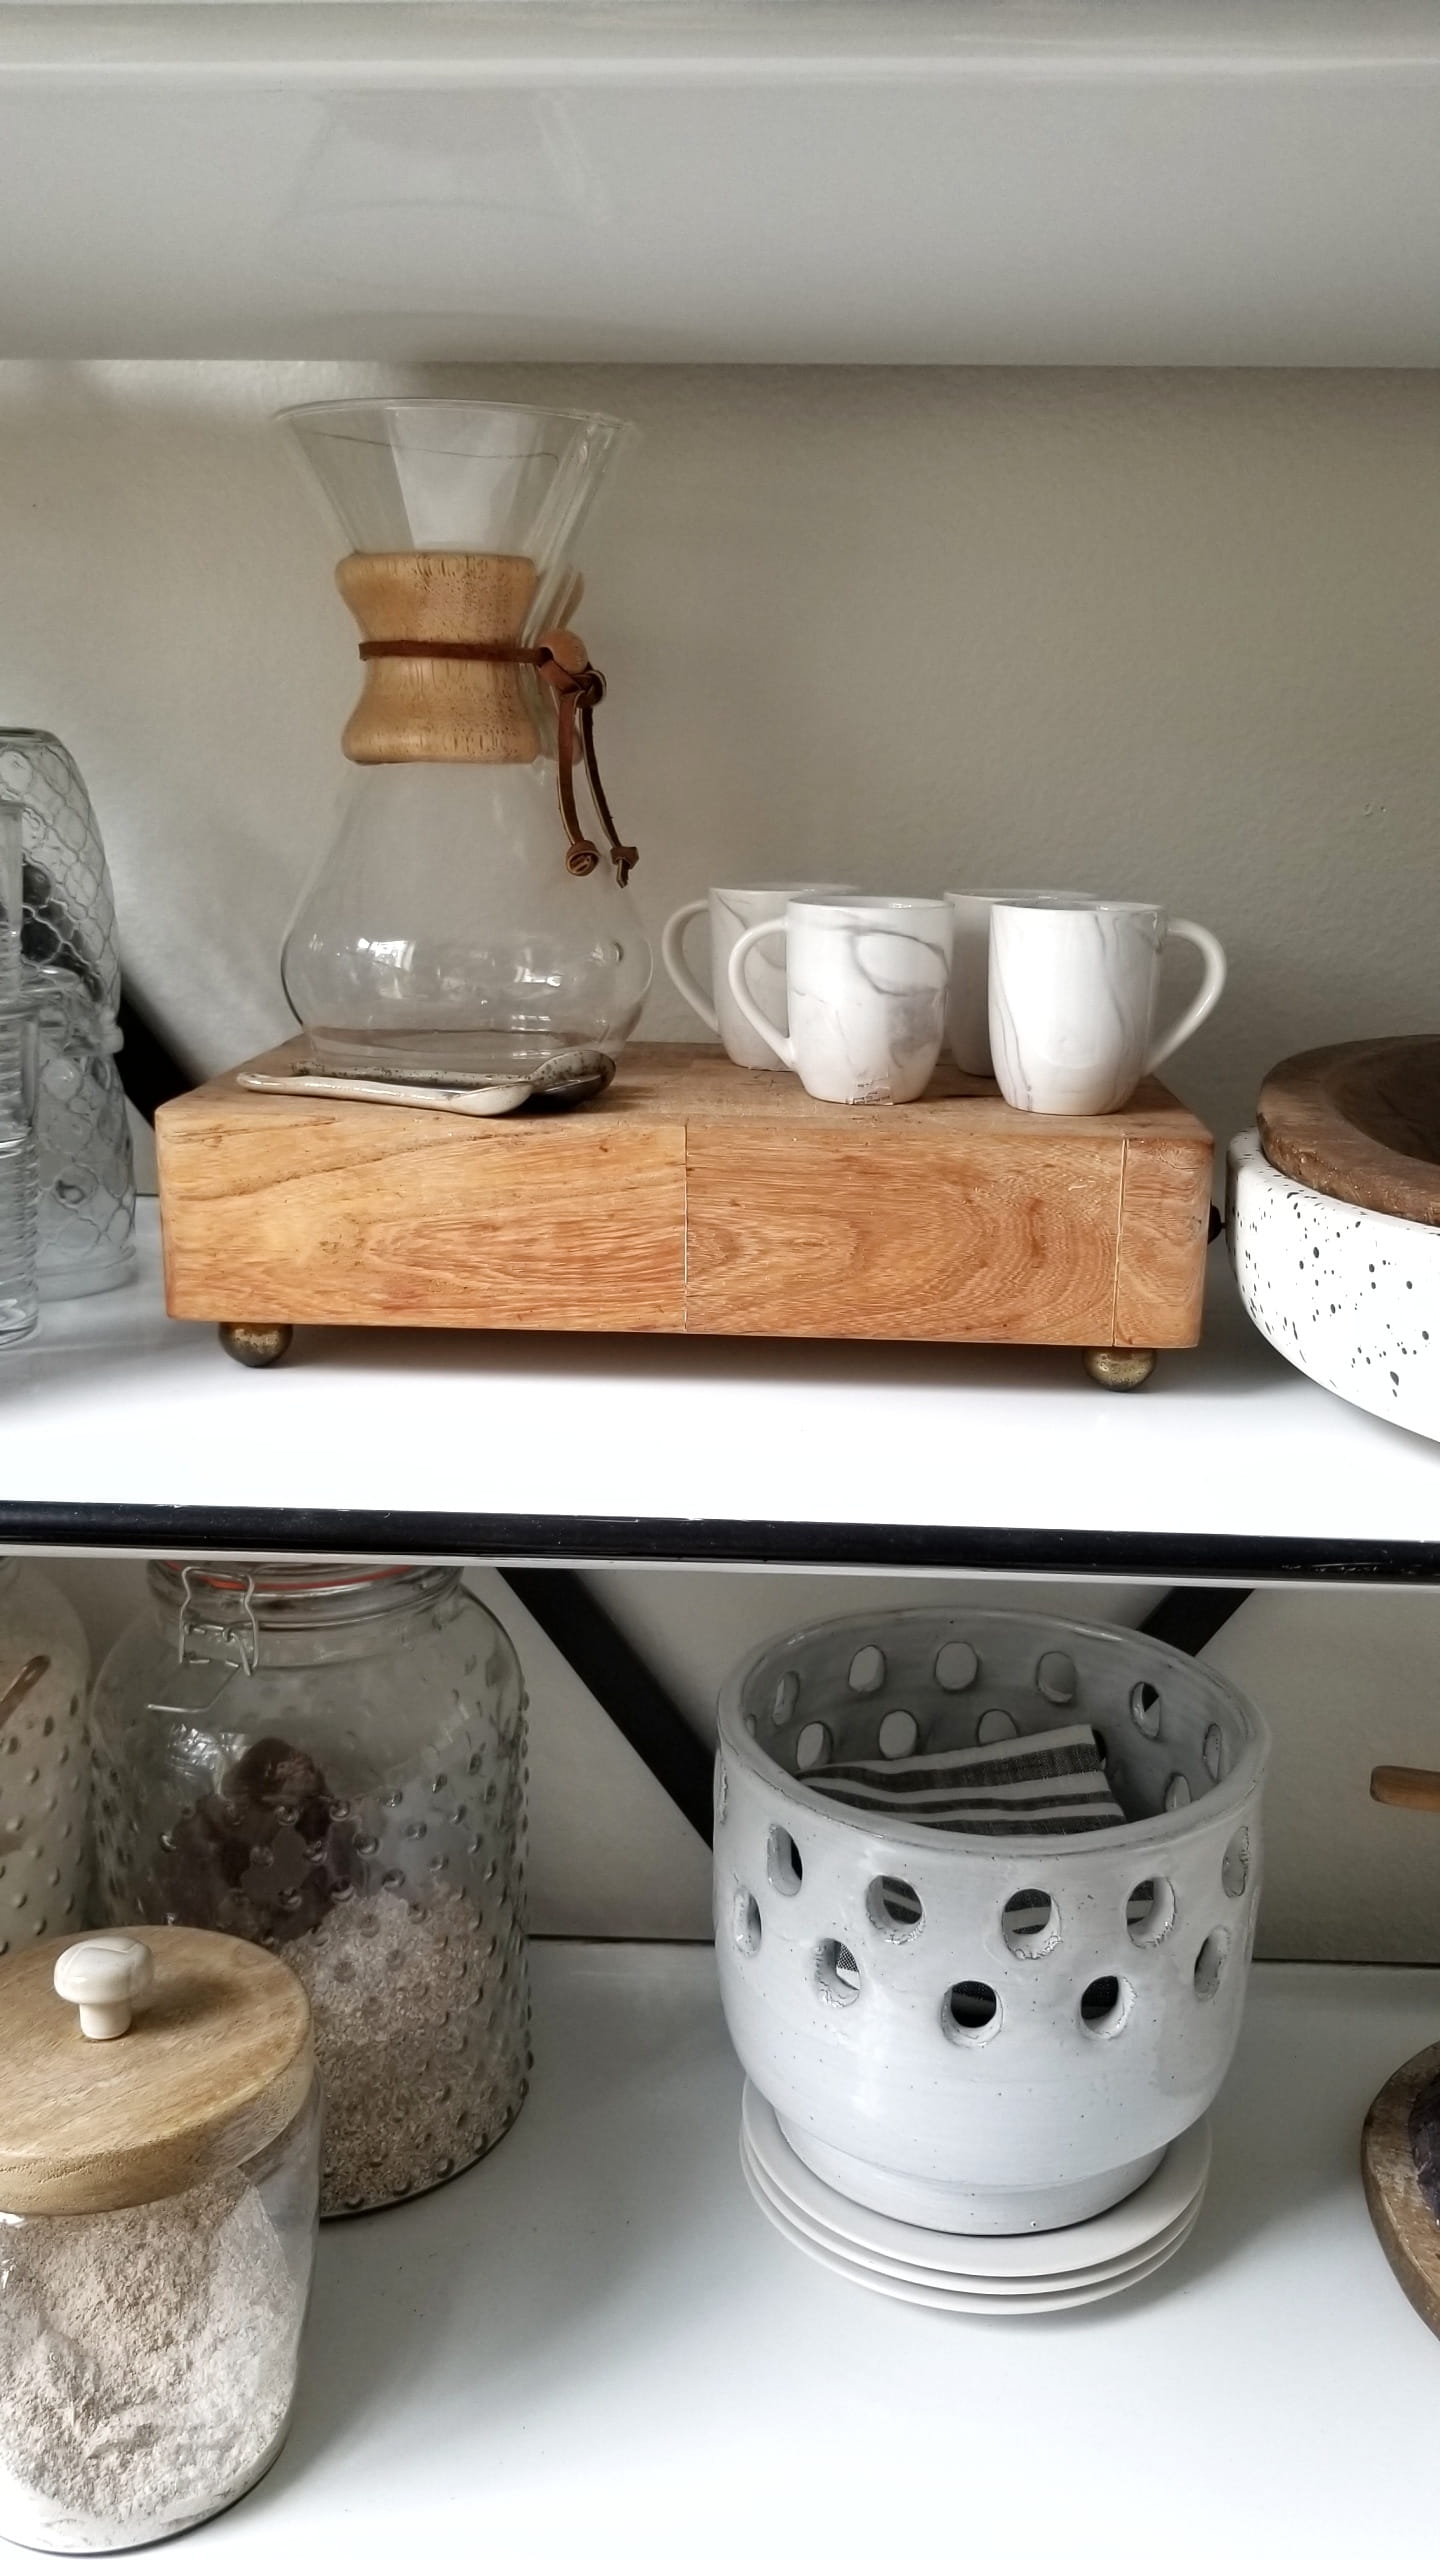 white kitchen organization storage tips and tricks makeover accessories cabinets fixerupper modern farmhouse industrial chic extra space storage diy open shelving kitchen island shelves coffee station 